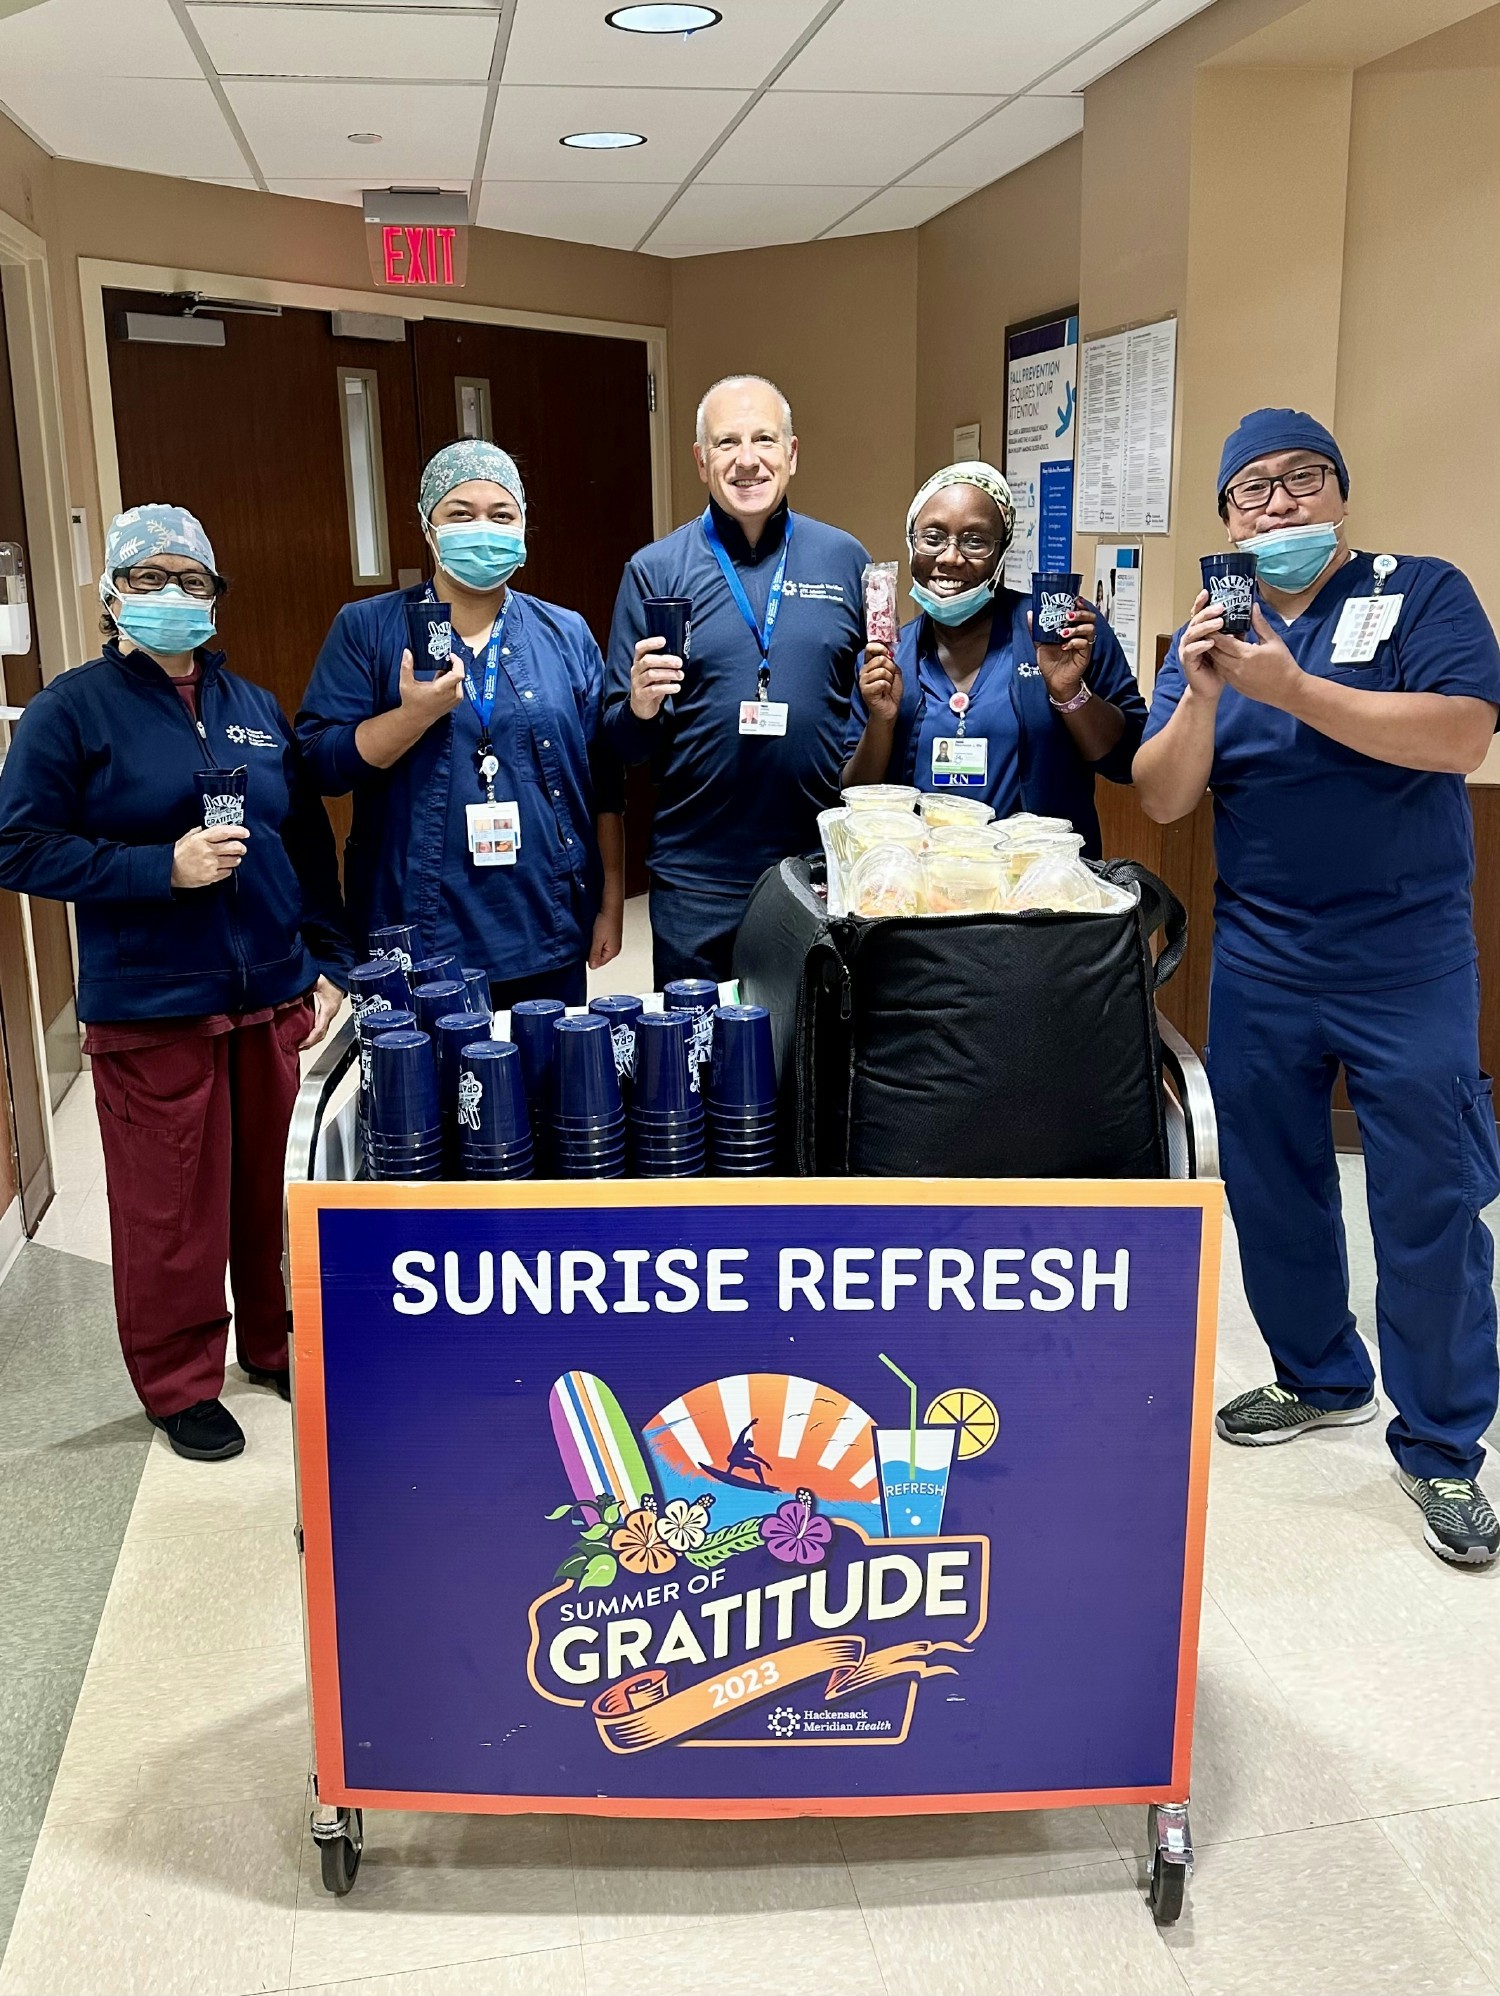 Recognizing our overnight team members and sharing our gratitude during Sunrise Refresh rounds.